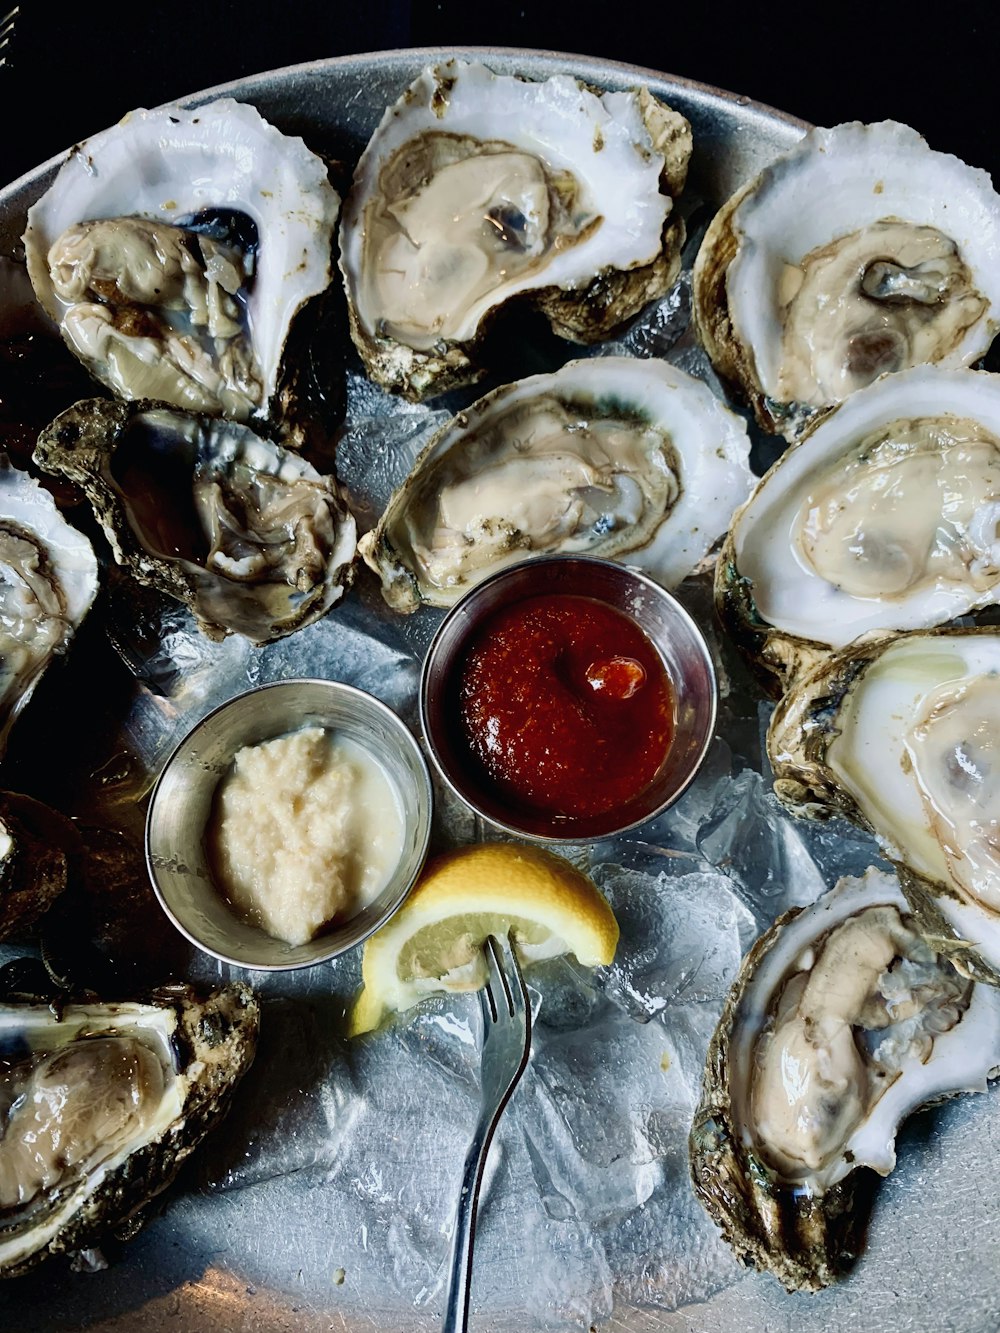 a plate of oysters with a side of ketchup